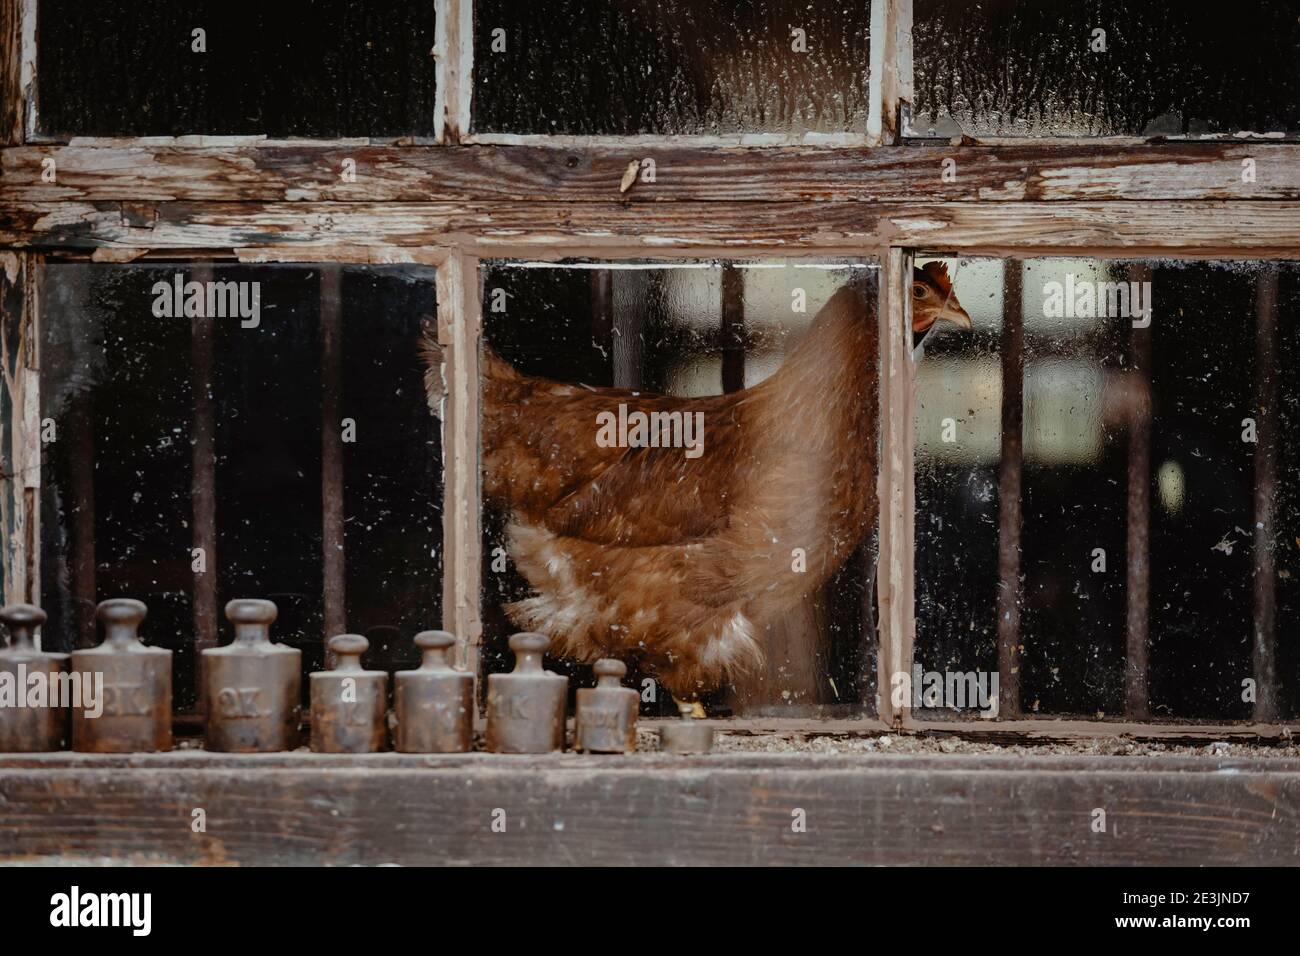 look trough a hen house window on a braun feathered hen and some on the black kilogram weights on the sill Stock Photo